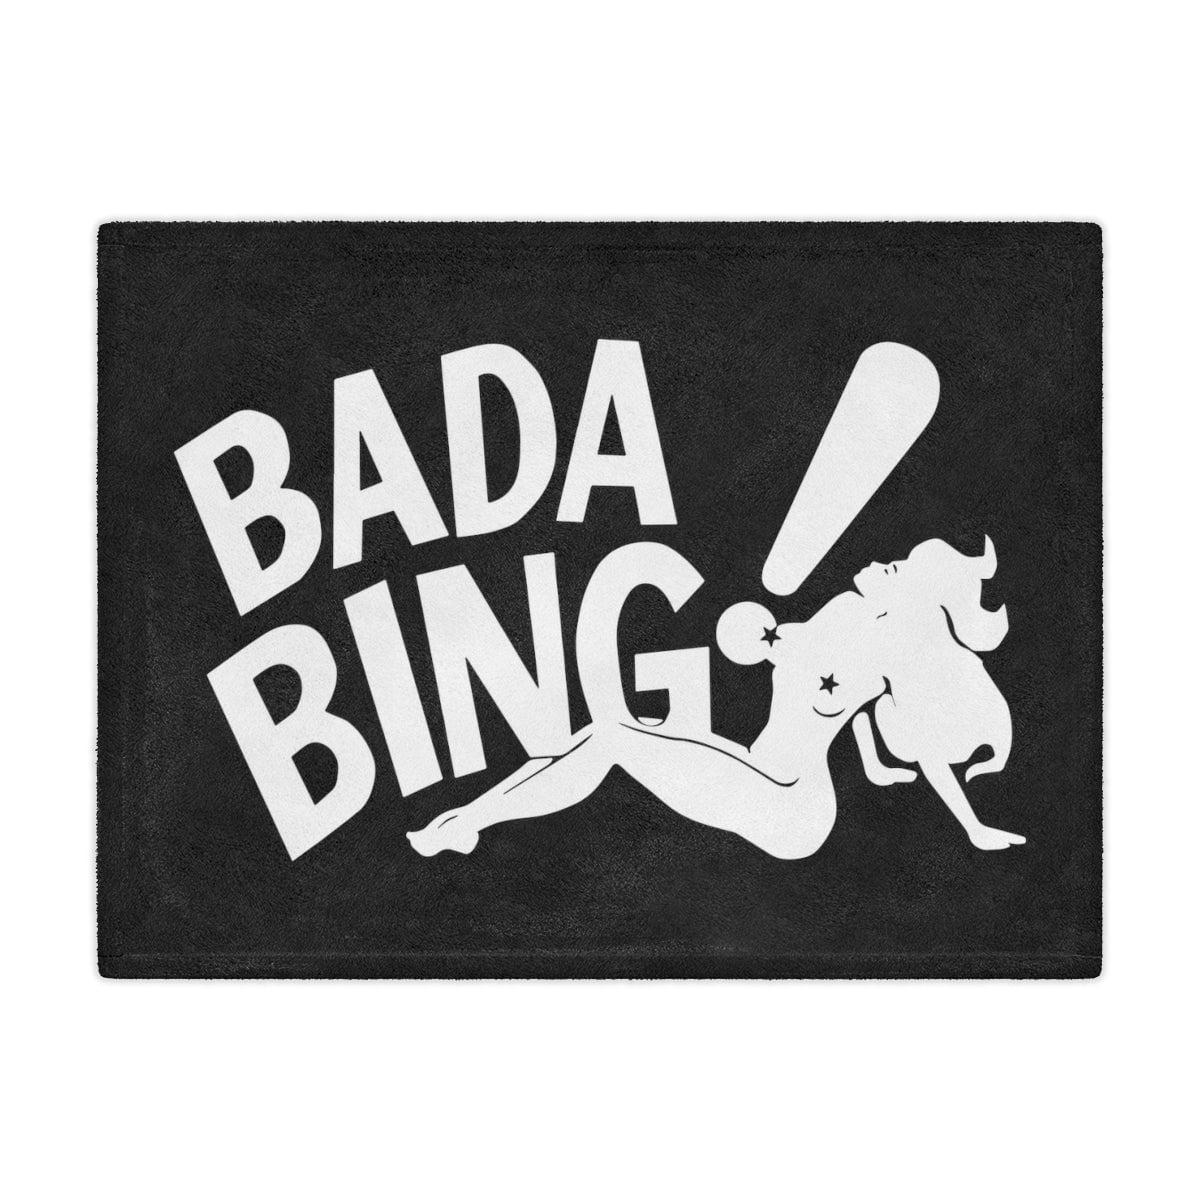 Bada Bing Mobsters Club Minky Blanket - Cozy Mafia Vibes for Your Home